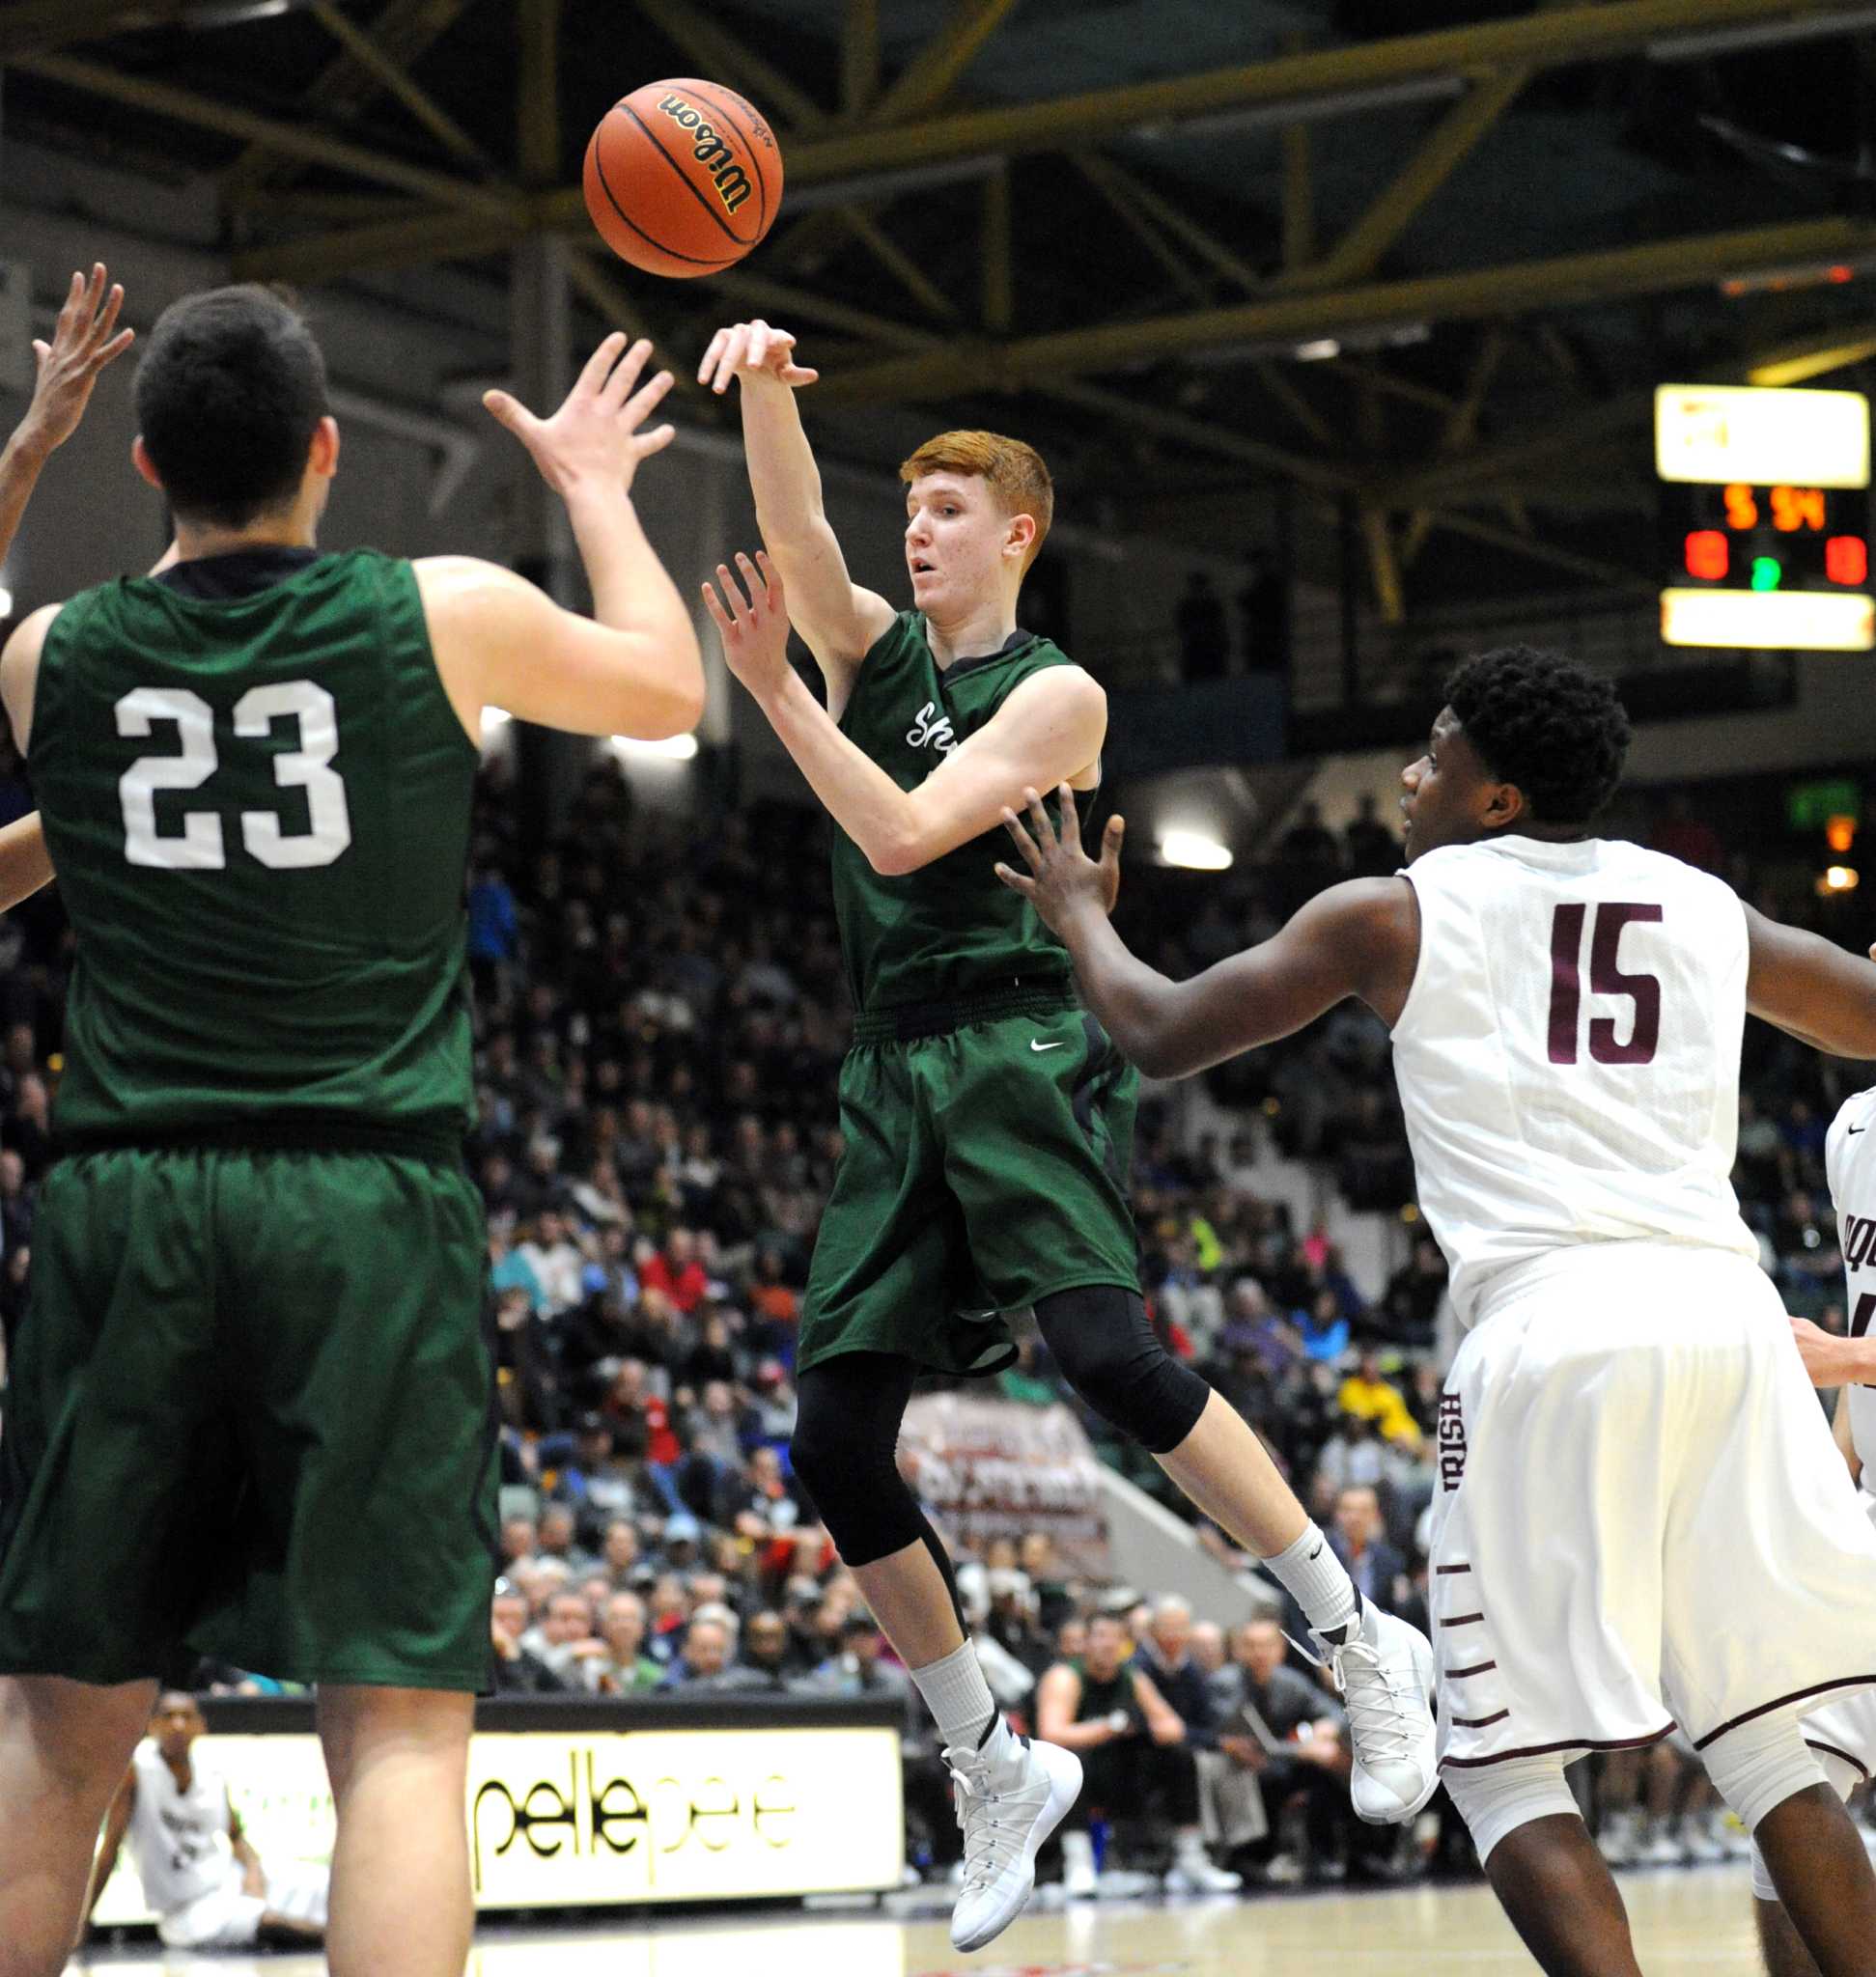 Huerter brothers continue to make history for Shen boys basketball